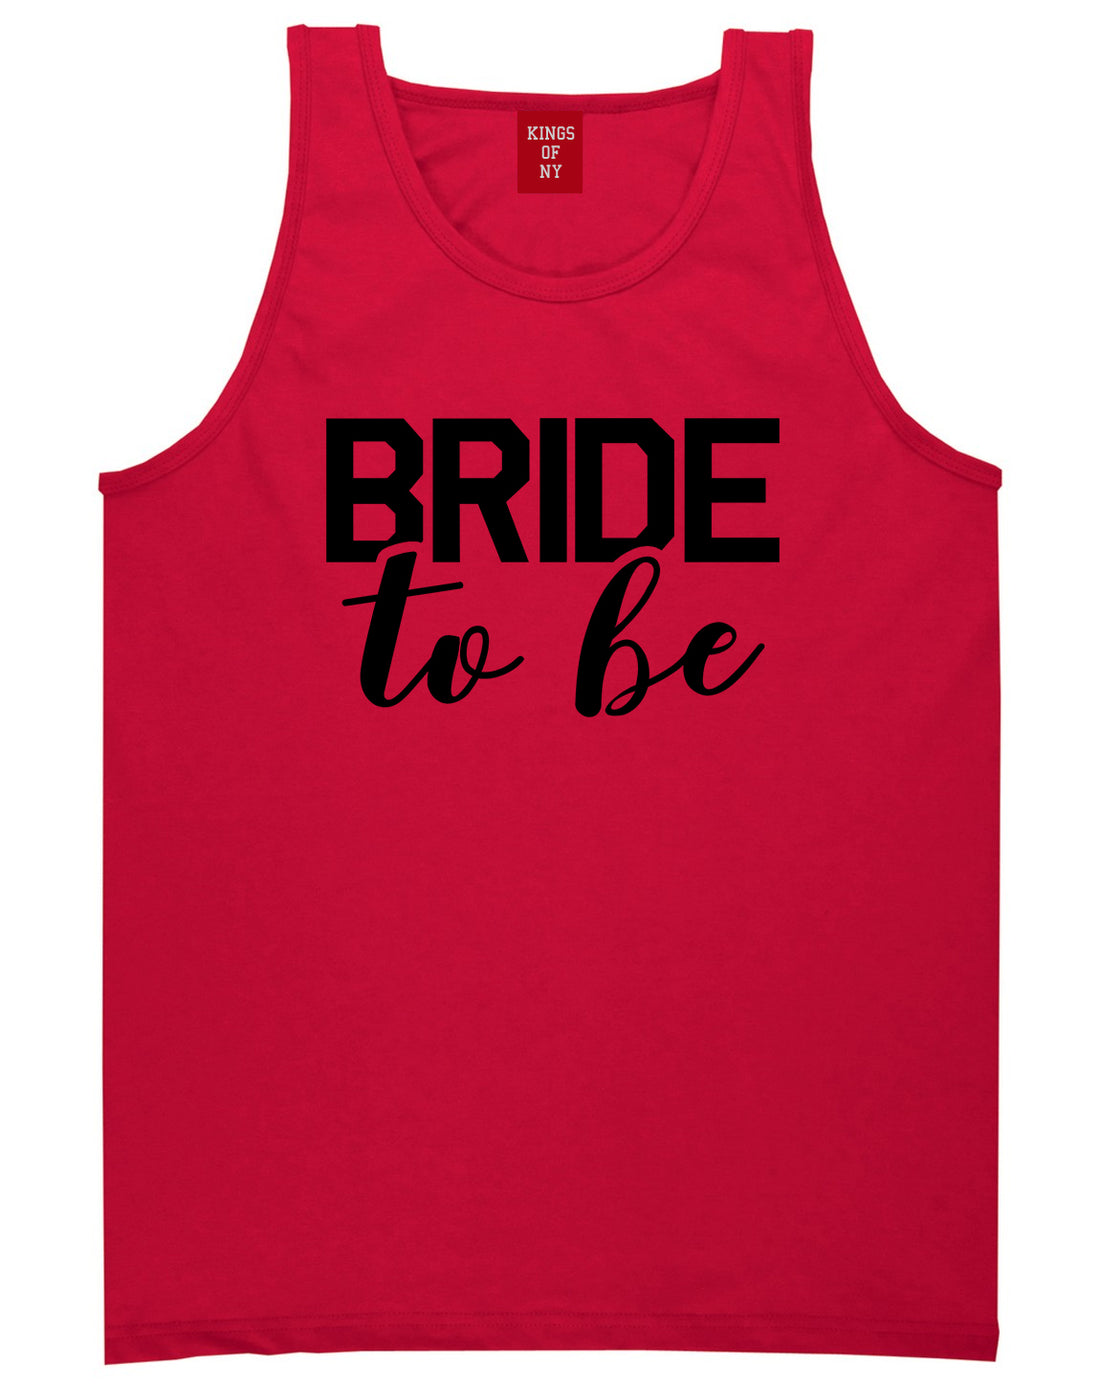 Bride To Be Red Tank Top Shirt by Kings Of NY